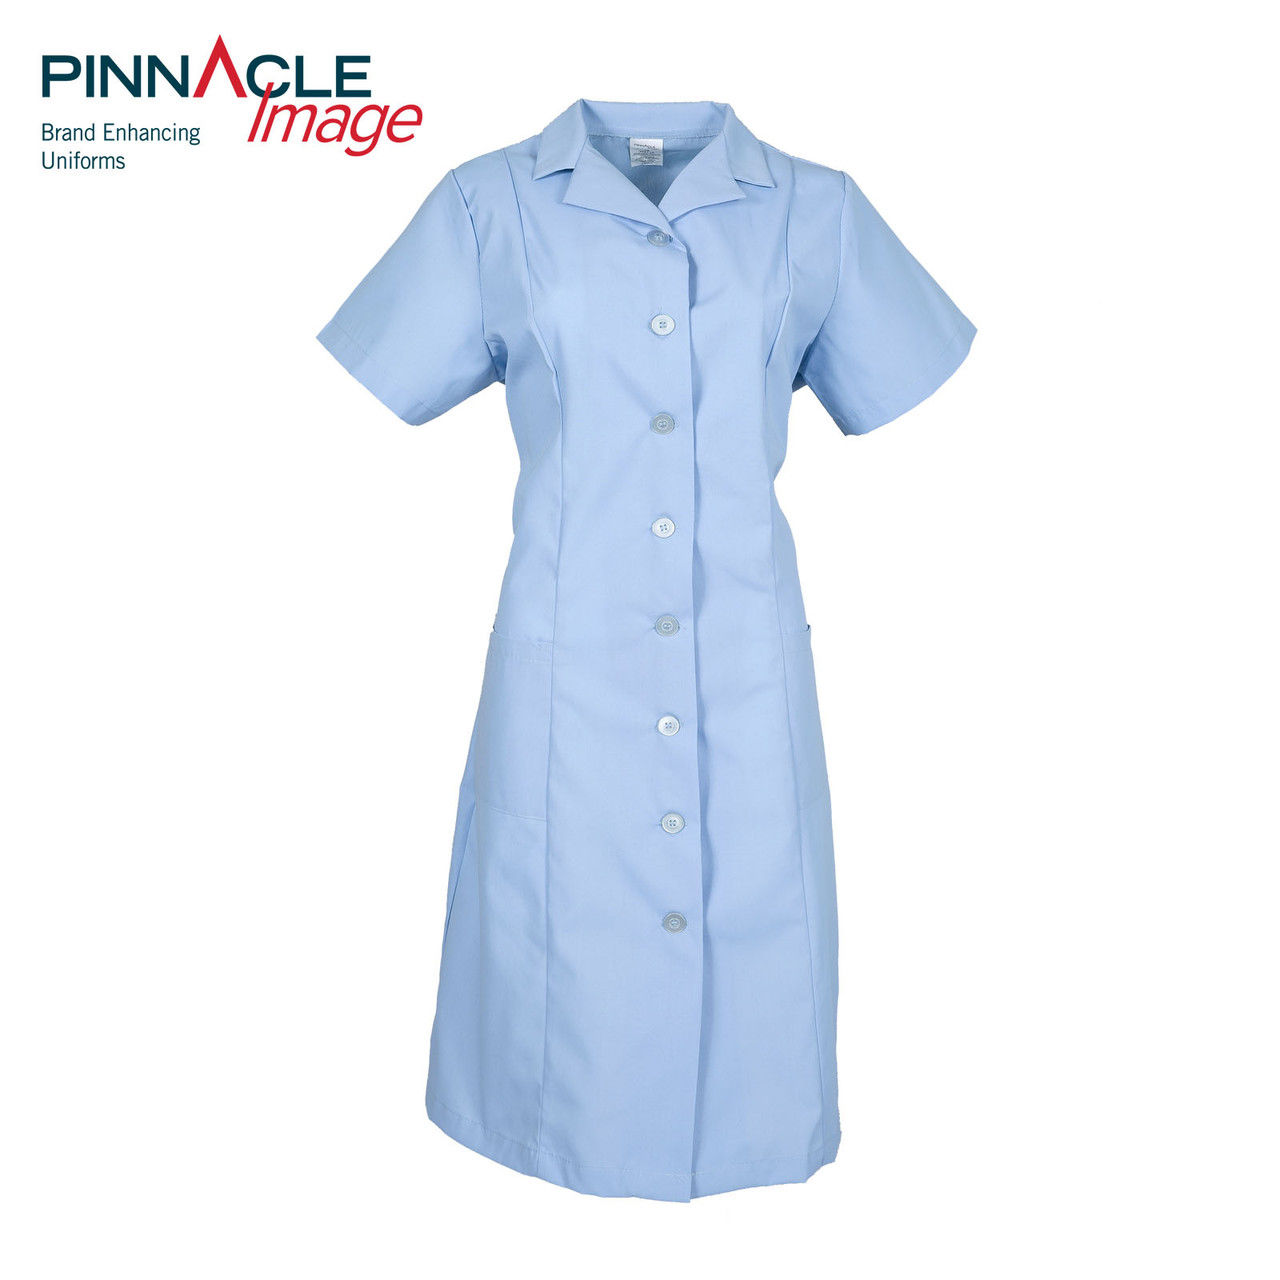 Where is the blue uniform dress shipped from before purchase?